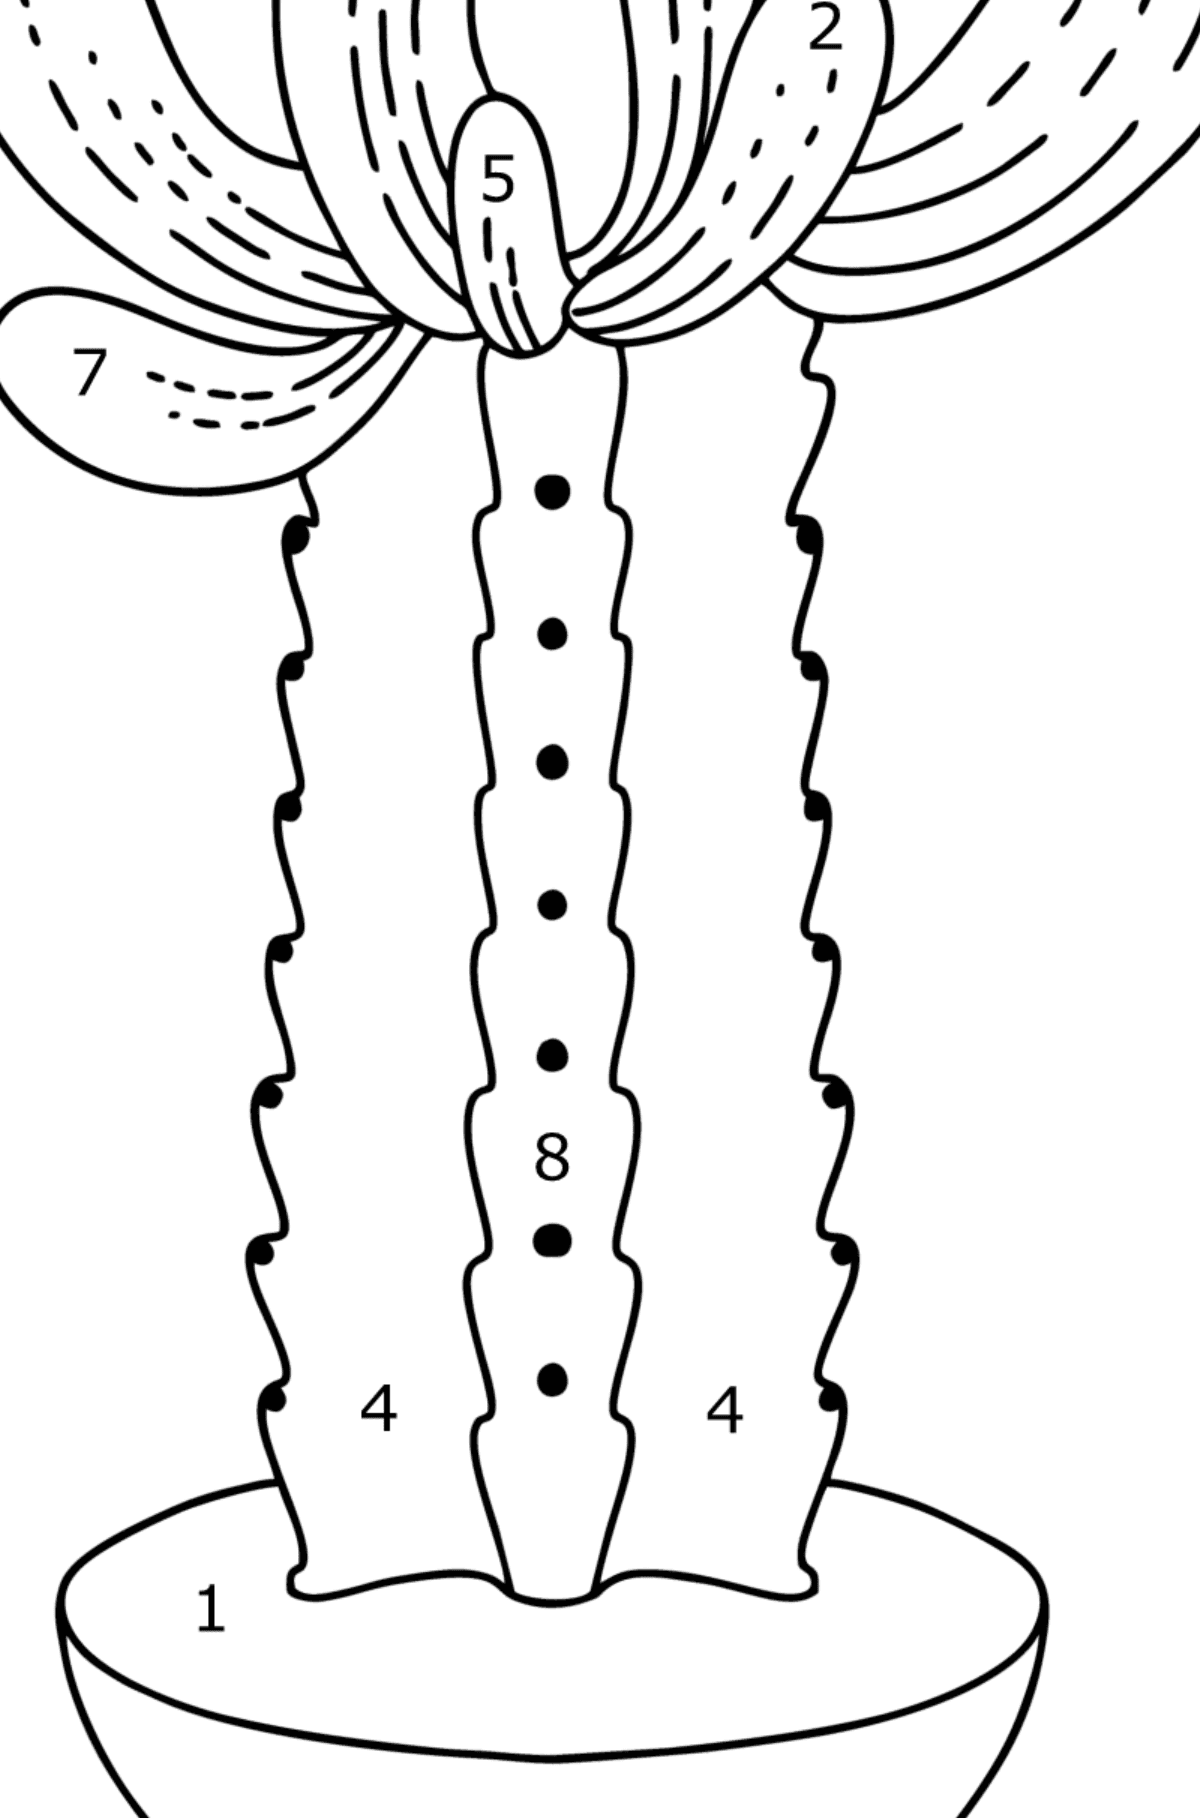 Simple cactus coloring page - Coloring by Numbers for Kids